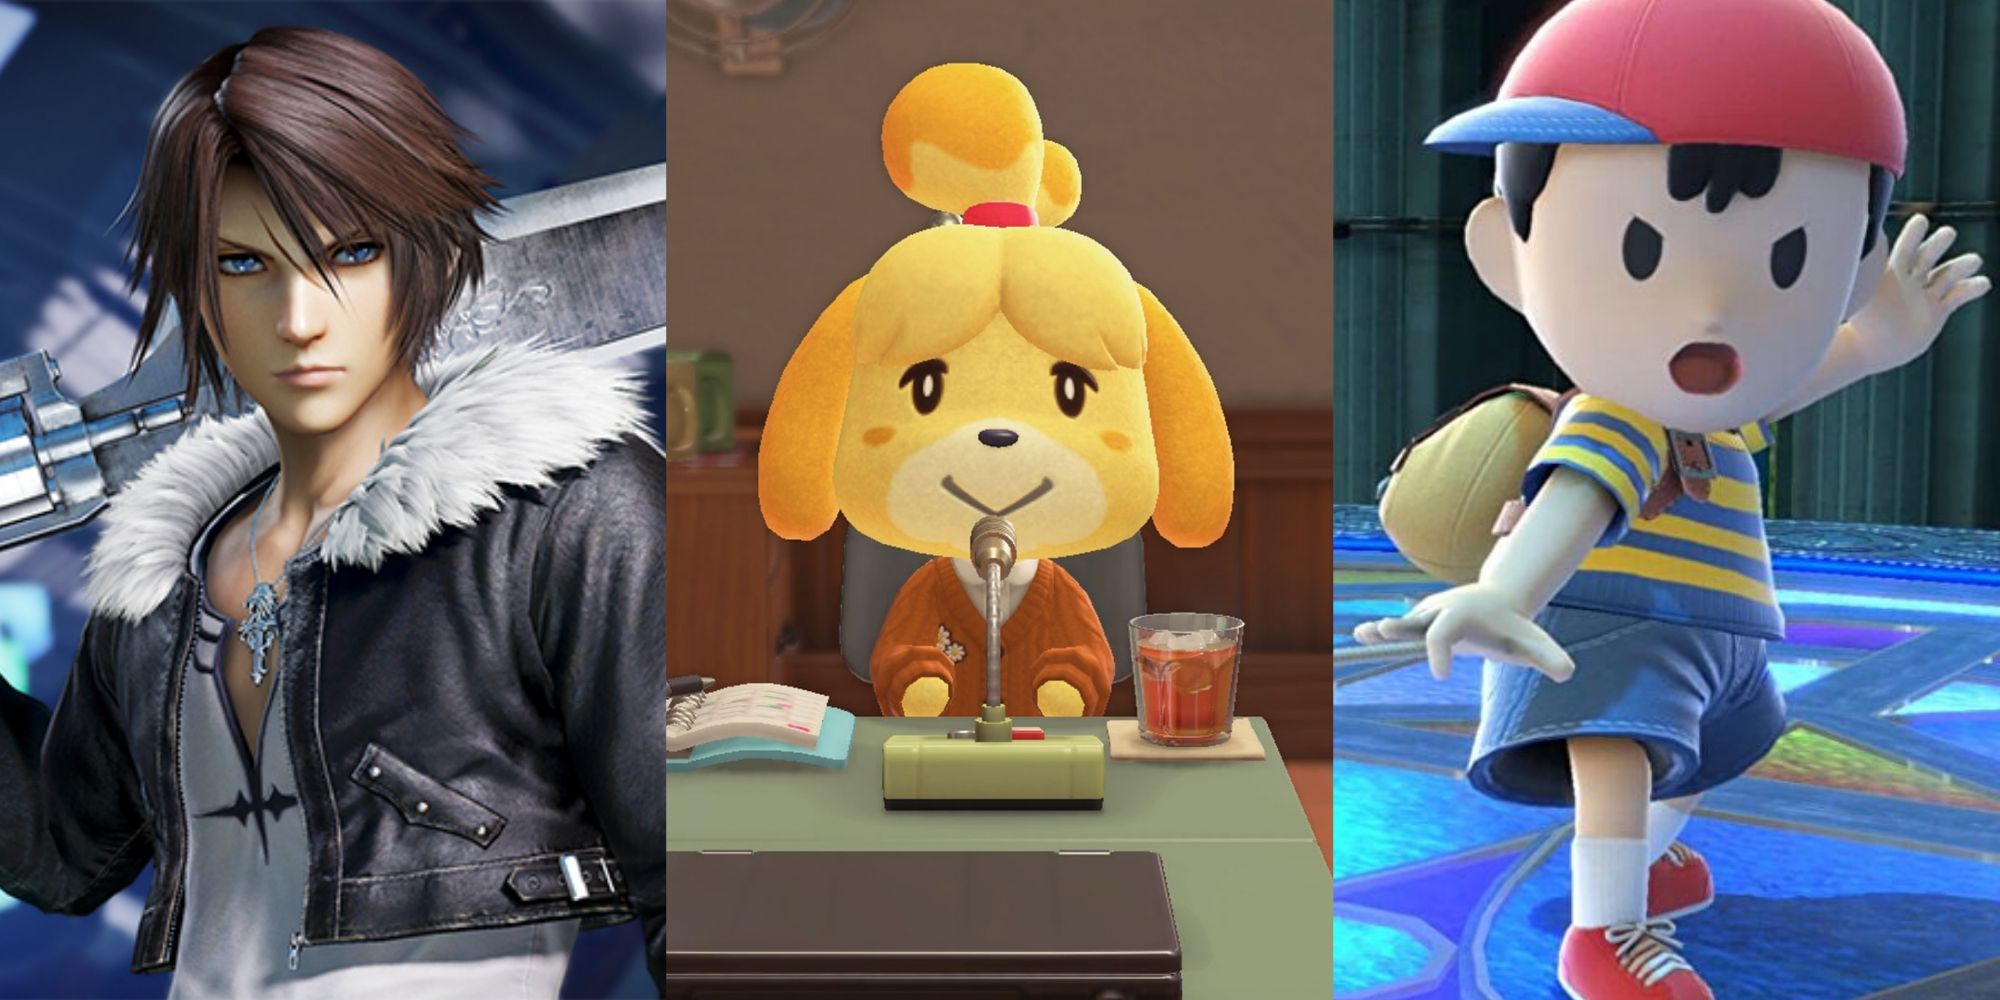 Split image screenshots of Squall Leonhart from Final Fantasy 8, Isabelle from Animal Crossing and Ness from Earthbound in Smash.